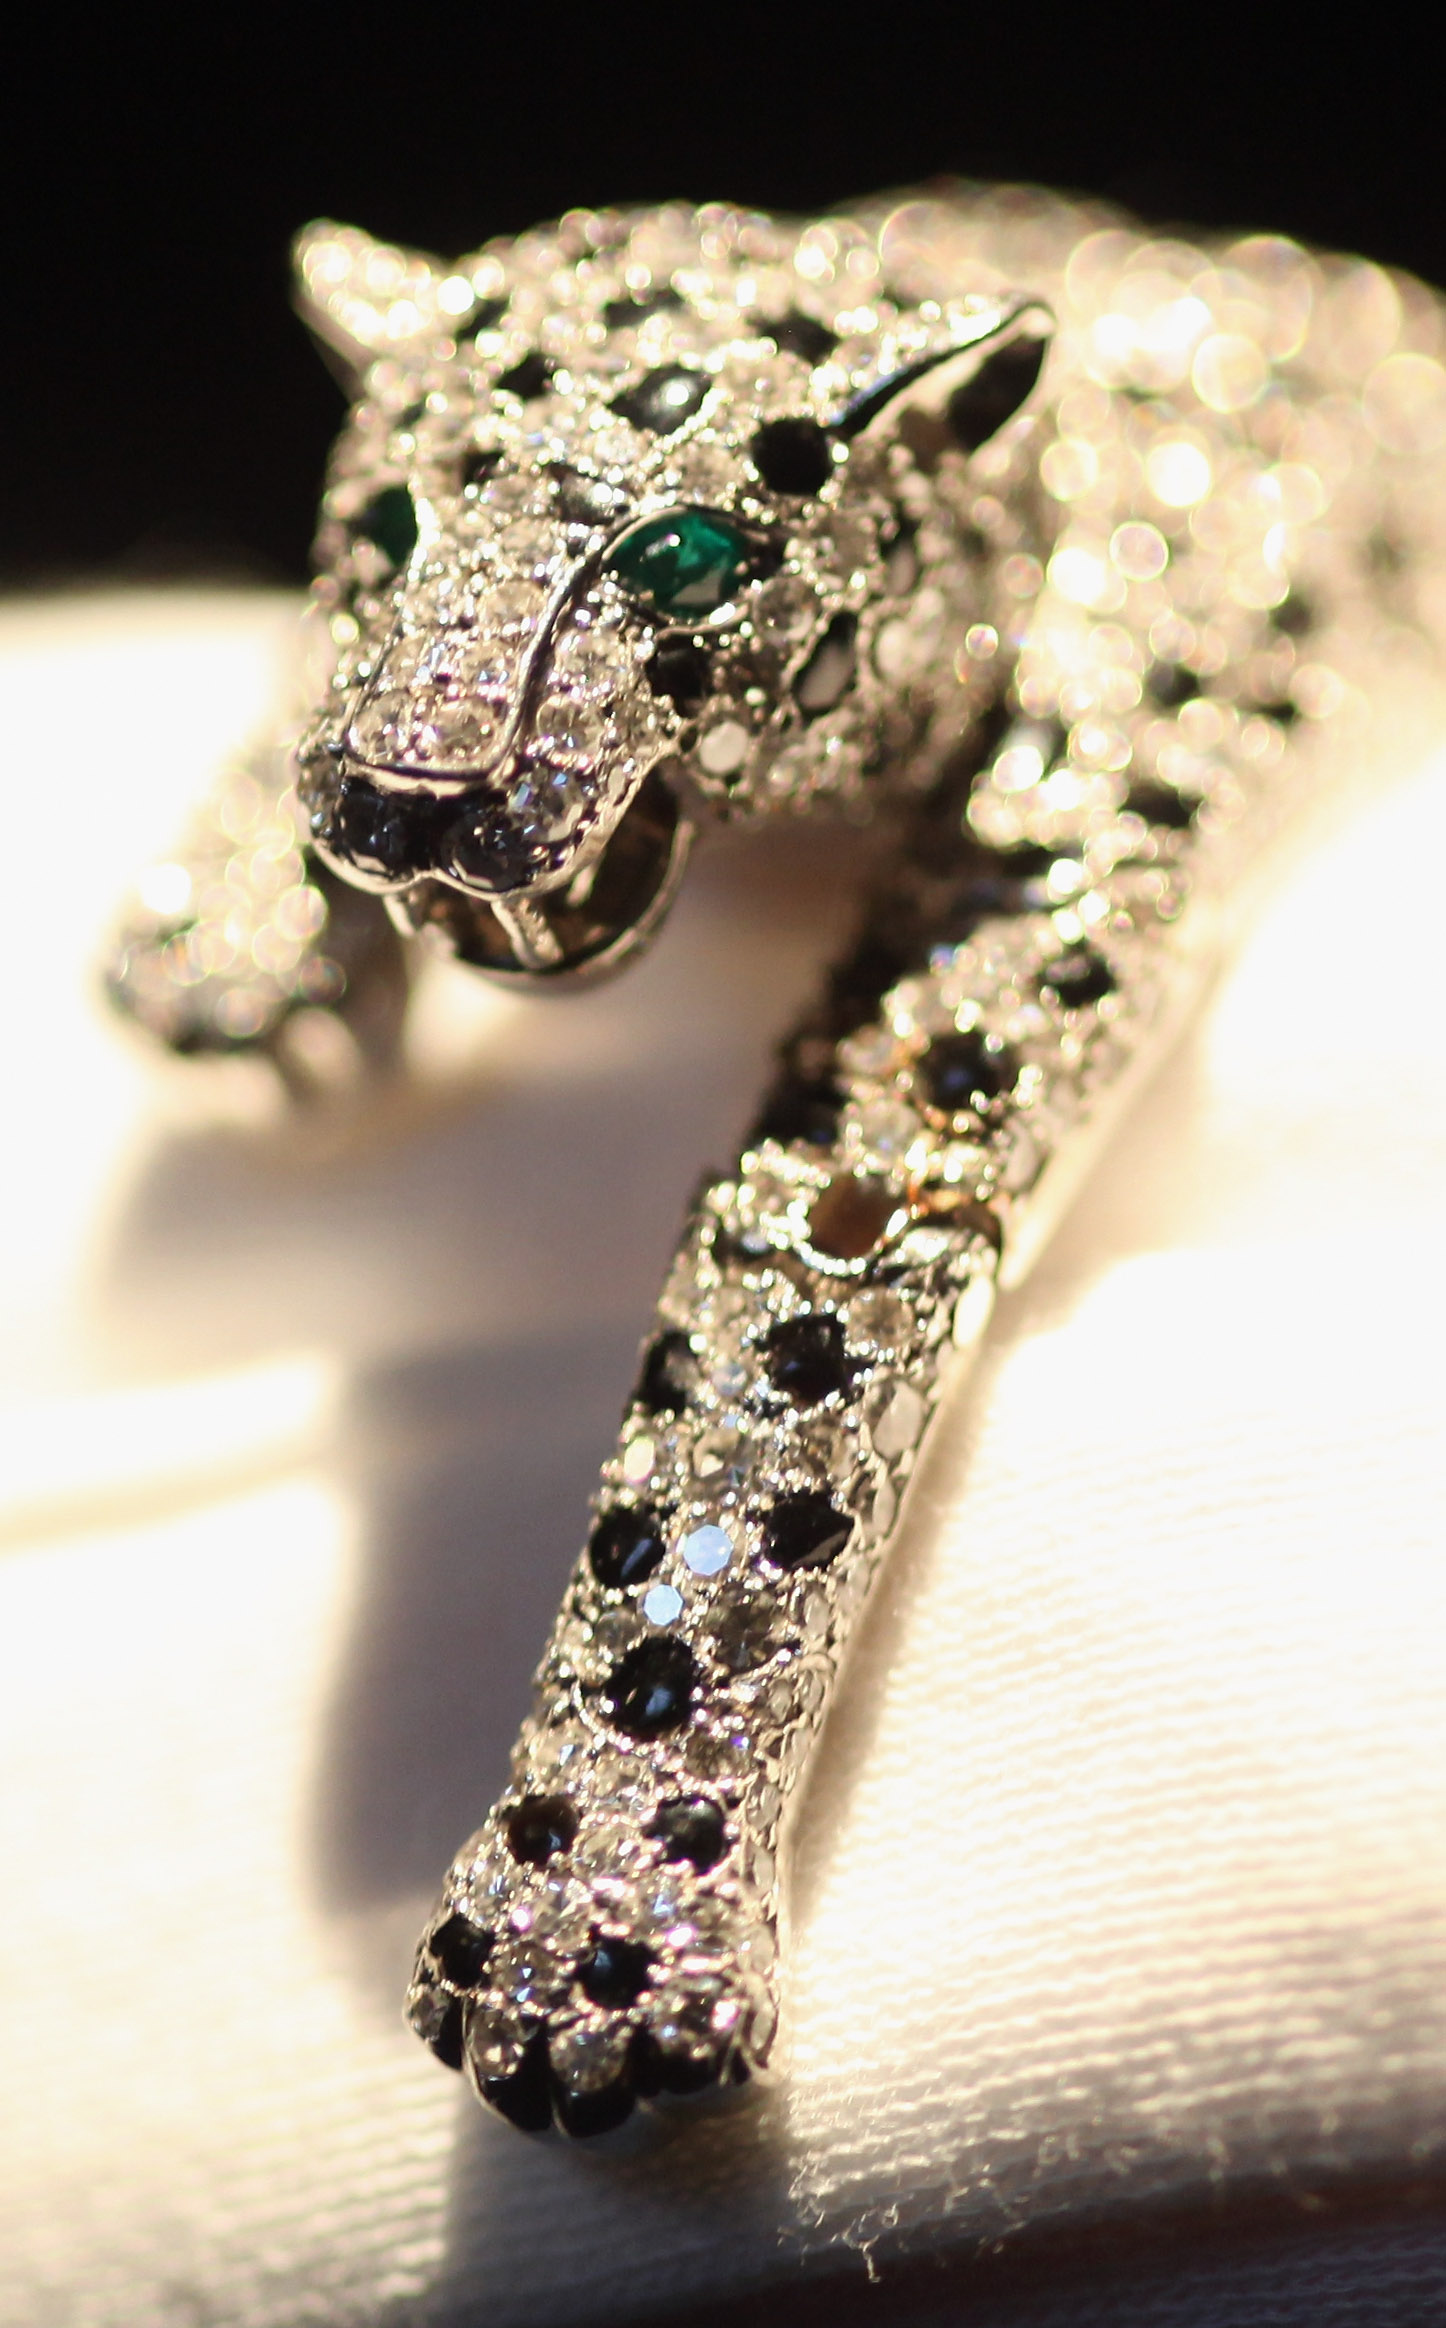 The Duchess of Windsor’s onyx and diamond panther bracelet designed and made by Cartier